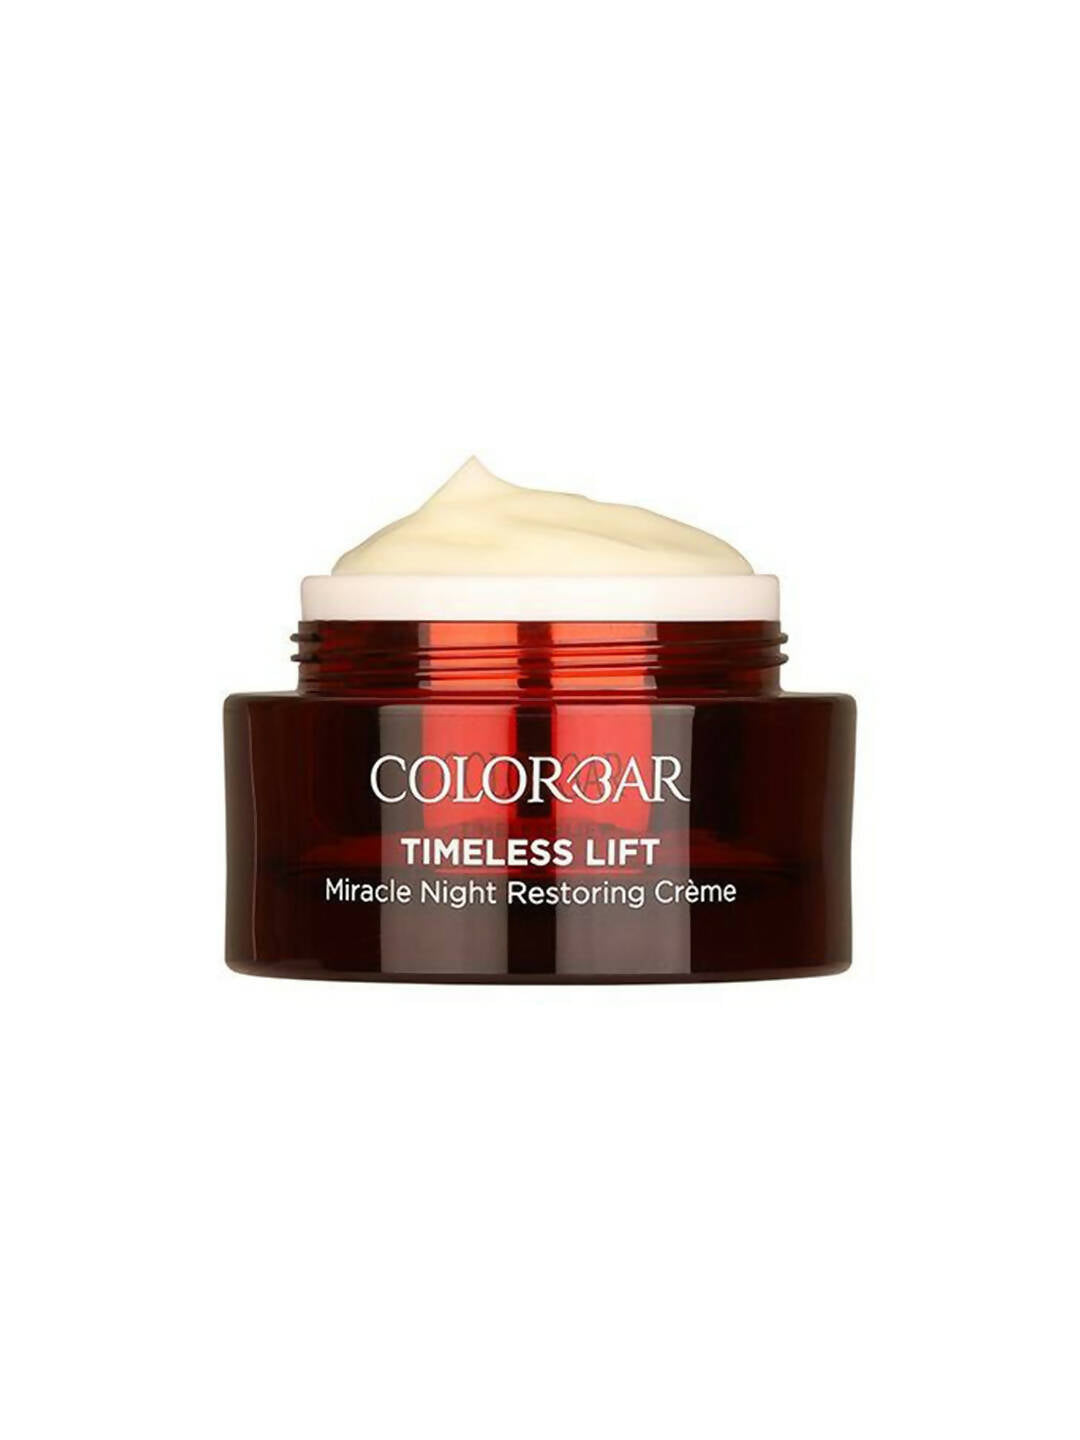 Colorbar Timeless Lift Timeless Lift Miracle Night Restoring Creme